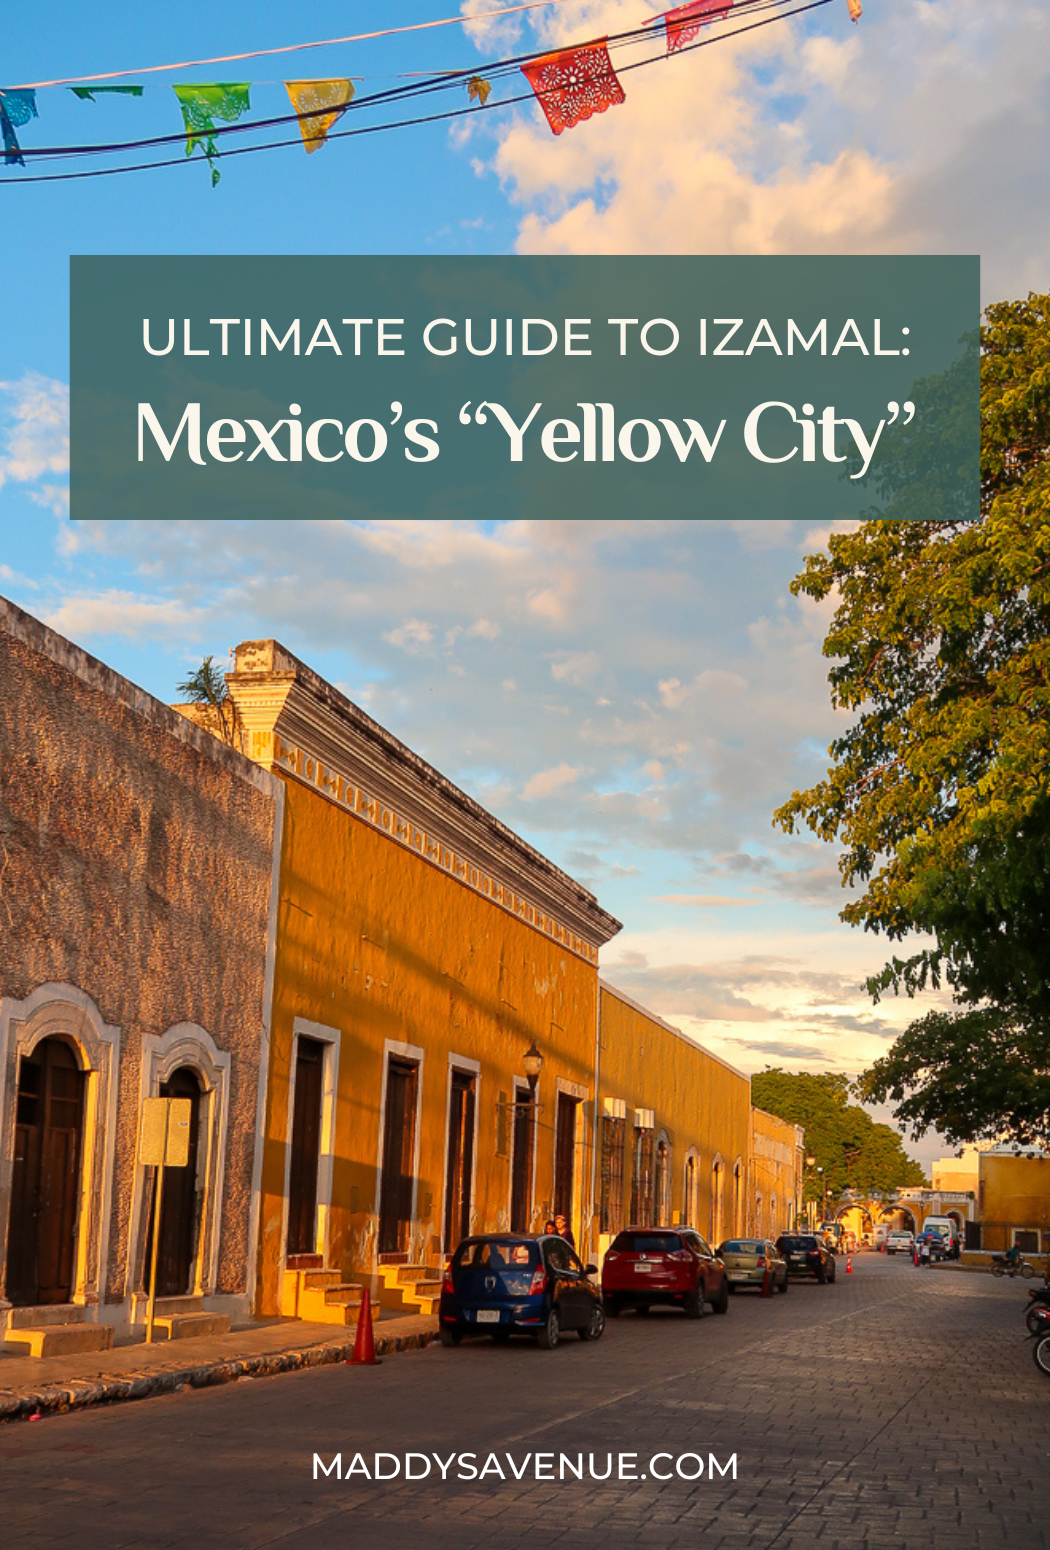 Located in the heart of the Yucatán Peninsula, you’ll find the most charming town that’s painted completely yellow: Izamal, Mexico. This peaceful town may be known as Mexico's "Yellow City", but it has a lot more to offer than just romantic cobblestone streets! From multiple Mayan ruin sites and an incredible historic convent to traditional Yucatecan restaurants and a vibrant local market, there are plenty of incredible things to do in Izamal. In this guide, I cover the best things to do in Izamal, how to get to Izamal, where to eat, where to stay, and other must-know tips.